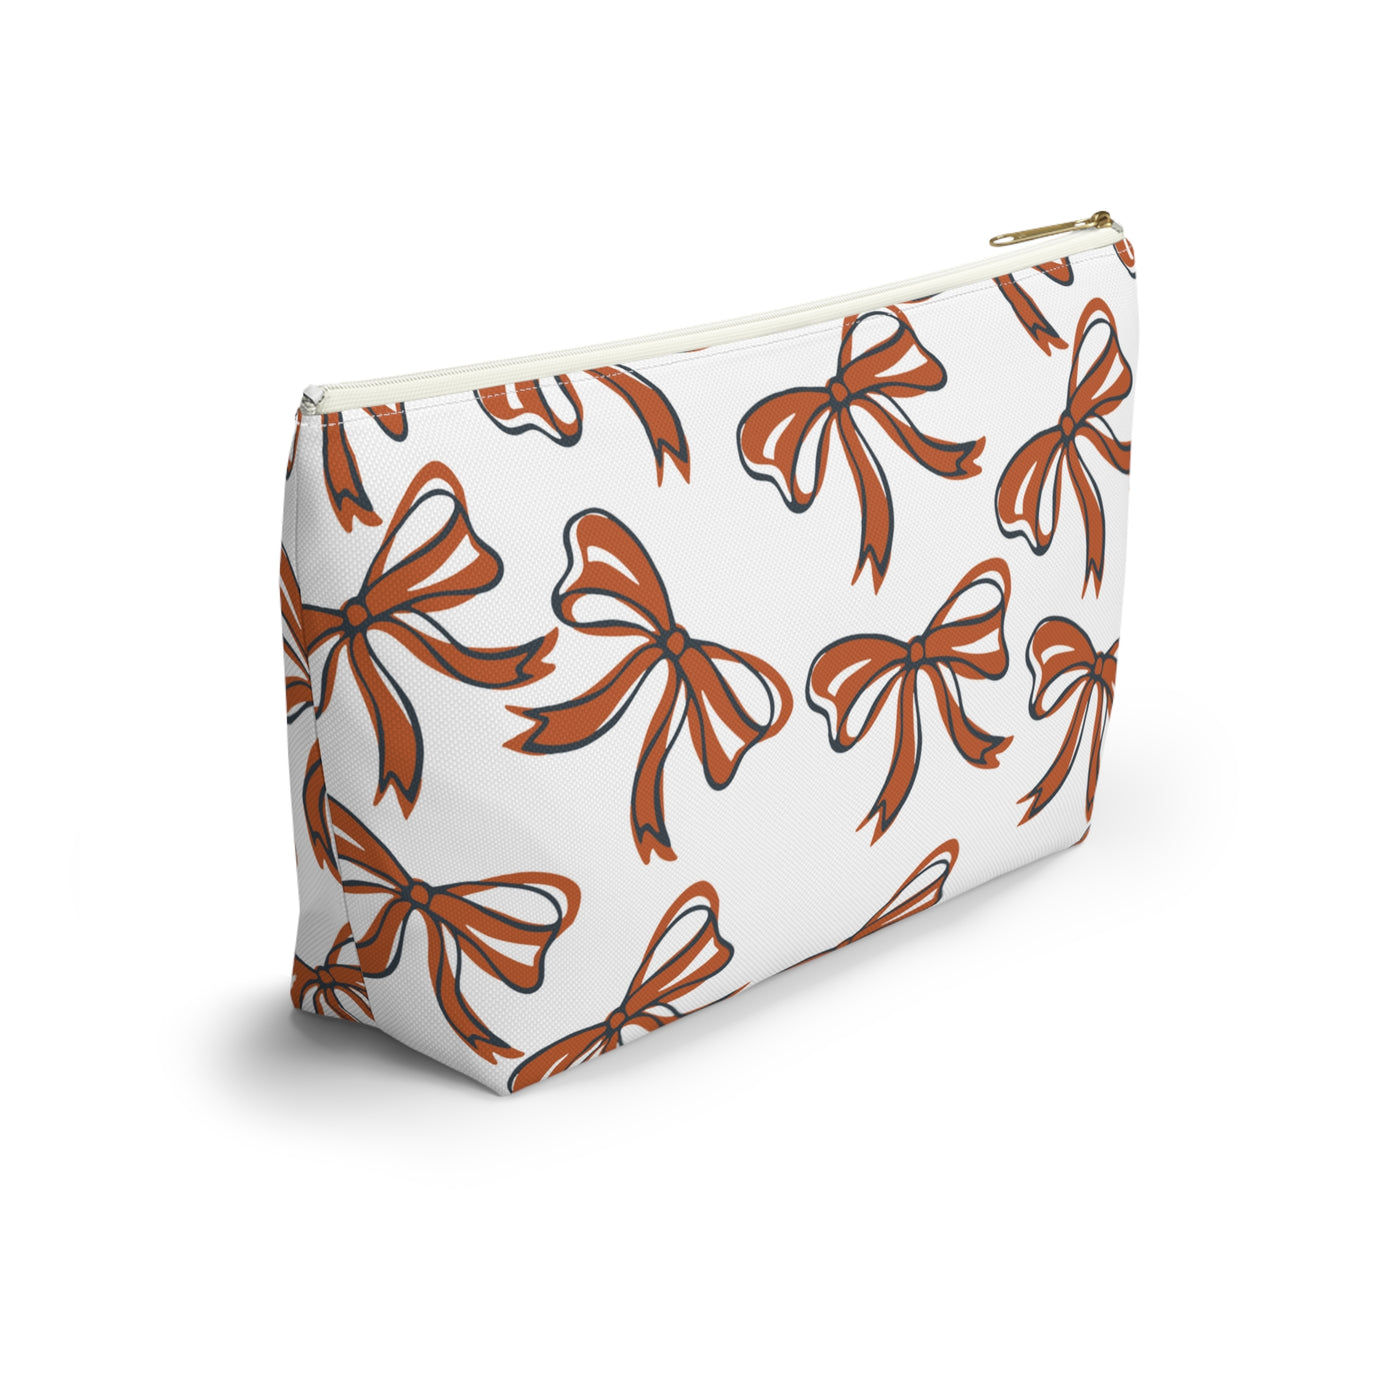 Trendy Bow Makeup Bag - Graduation Gift, Bed Party Gift, Acceptance Gift, College Gift, Texas, Burnt Orange and White